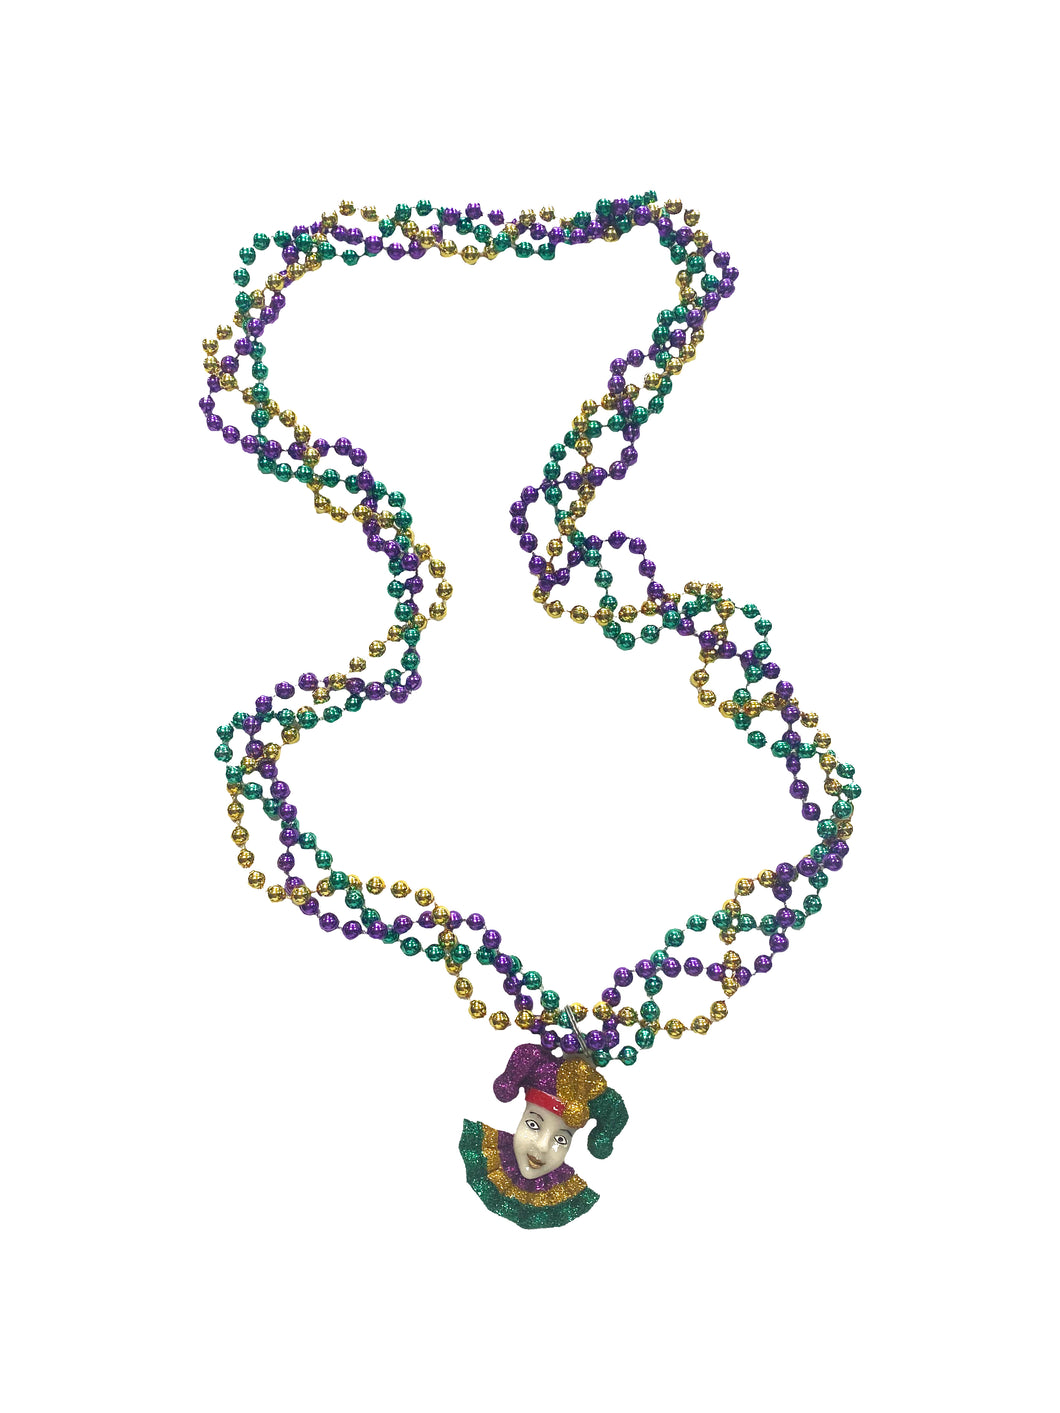 Mardi Gras Jester Medallion on Multi Strand Purple, Green, and Gold Specialty Bead